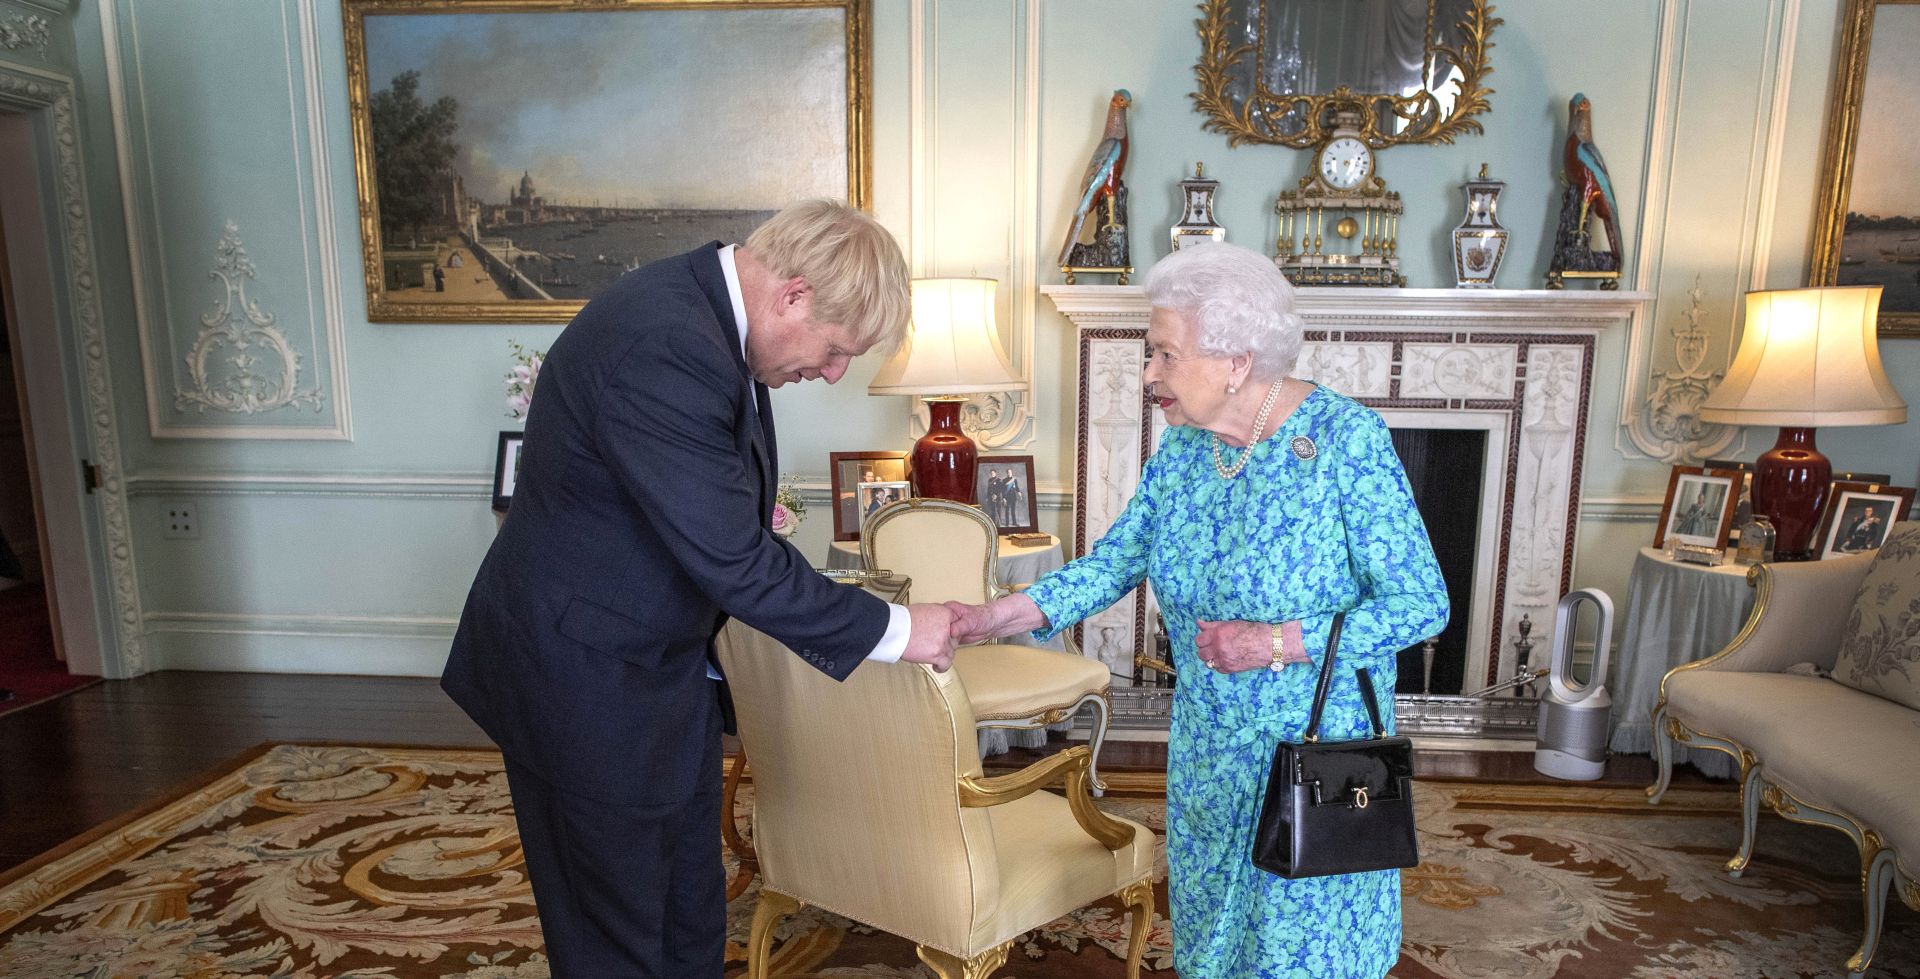 epa07737747 Britain's Queen Elizabeth II welcomes newly elected leader of the Conservative party Boris Johnson during an audience in Buckingham Palace, London, Britain, 24 July 2019 where she invited him to become Prime Minister and form a new government. Former London mayor and foreign secretary Boris Johnson is taking over the post after his election as party leader was announced the previous day. Theresa May stepped down as British Prime Minister following her resignation as Conservative Party leader on 07 June.  EPA/VICTORIA JONES / POOL